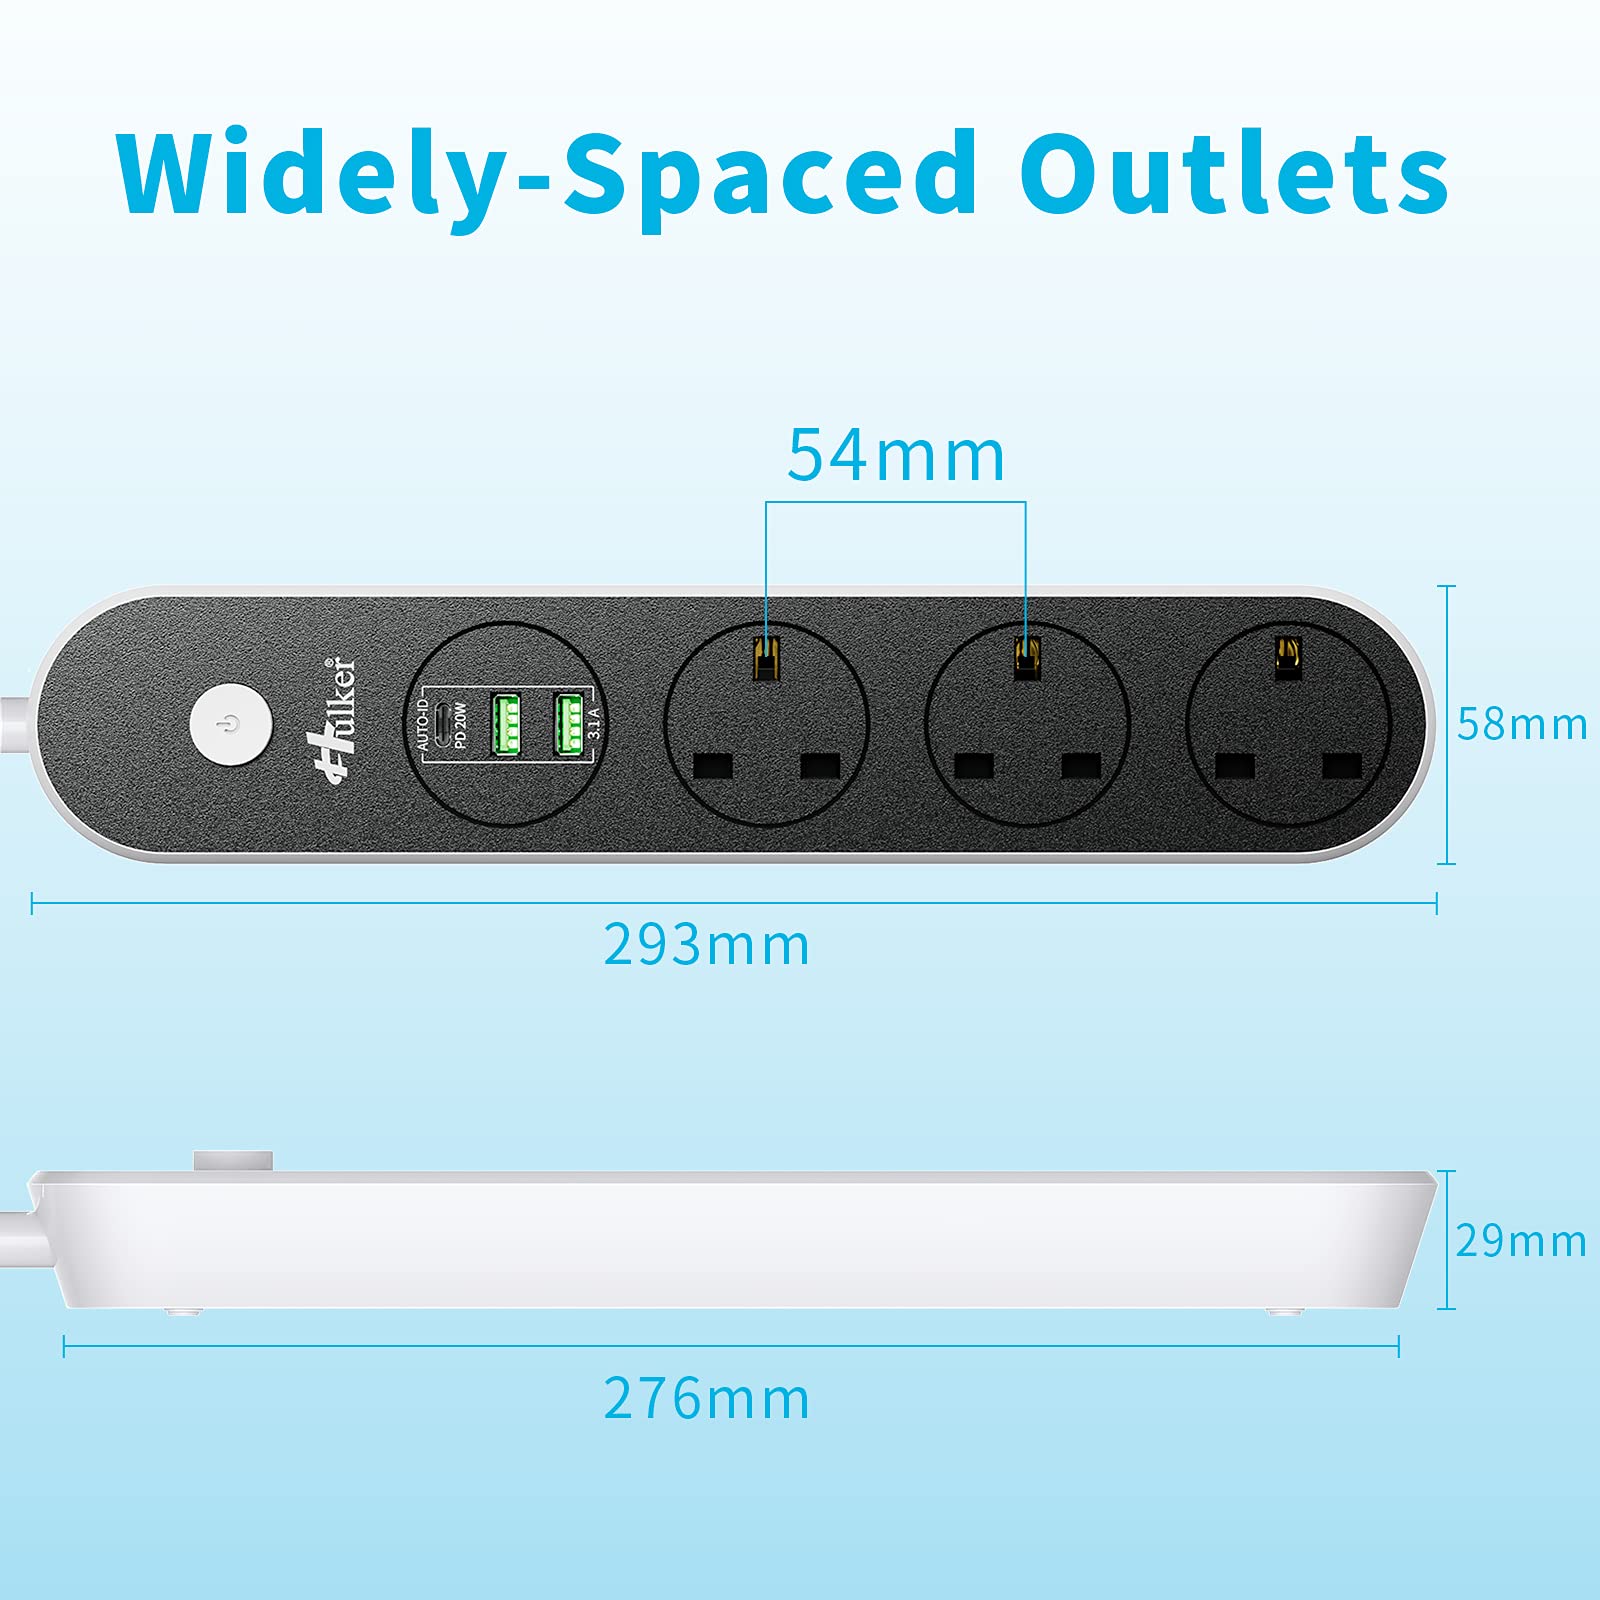 Extension Lead With USB C Port PD 20W, 3 Way Outlets (3250W 13A) Power Strip with 1 PD 20W TYPE C and 2 USB Ports, Safety Door Multi Plug Extension Socket with 1.6M Bold Extension cord for Home Office